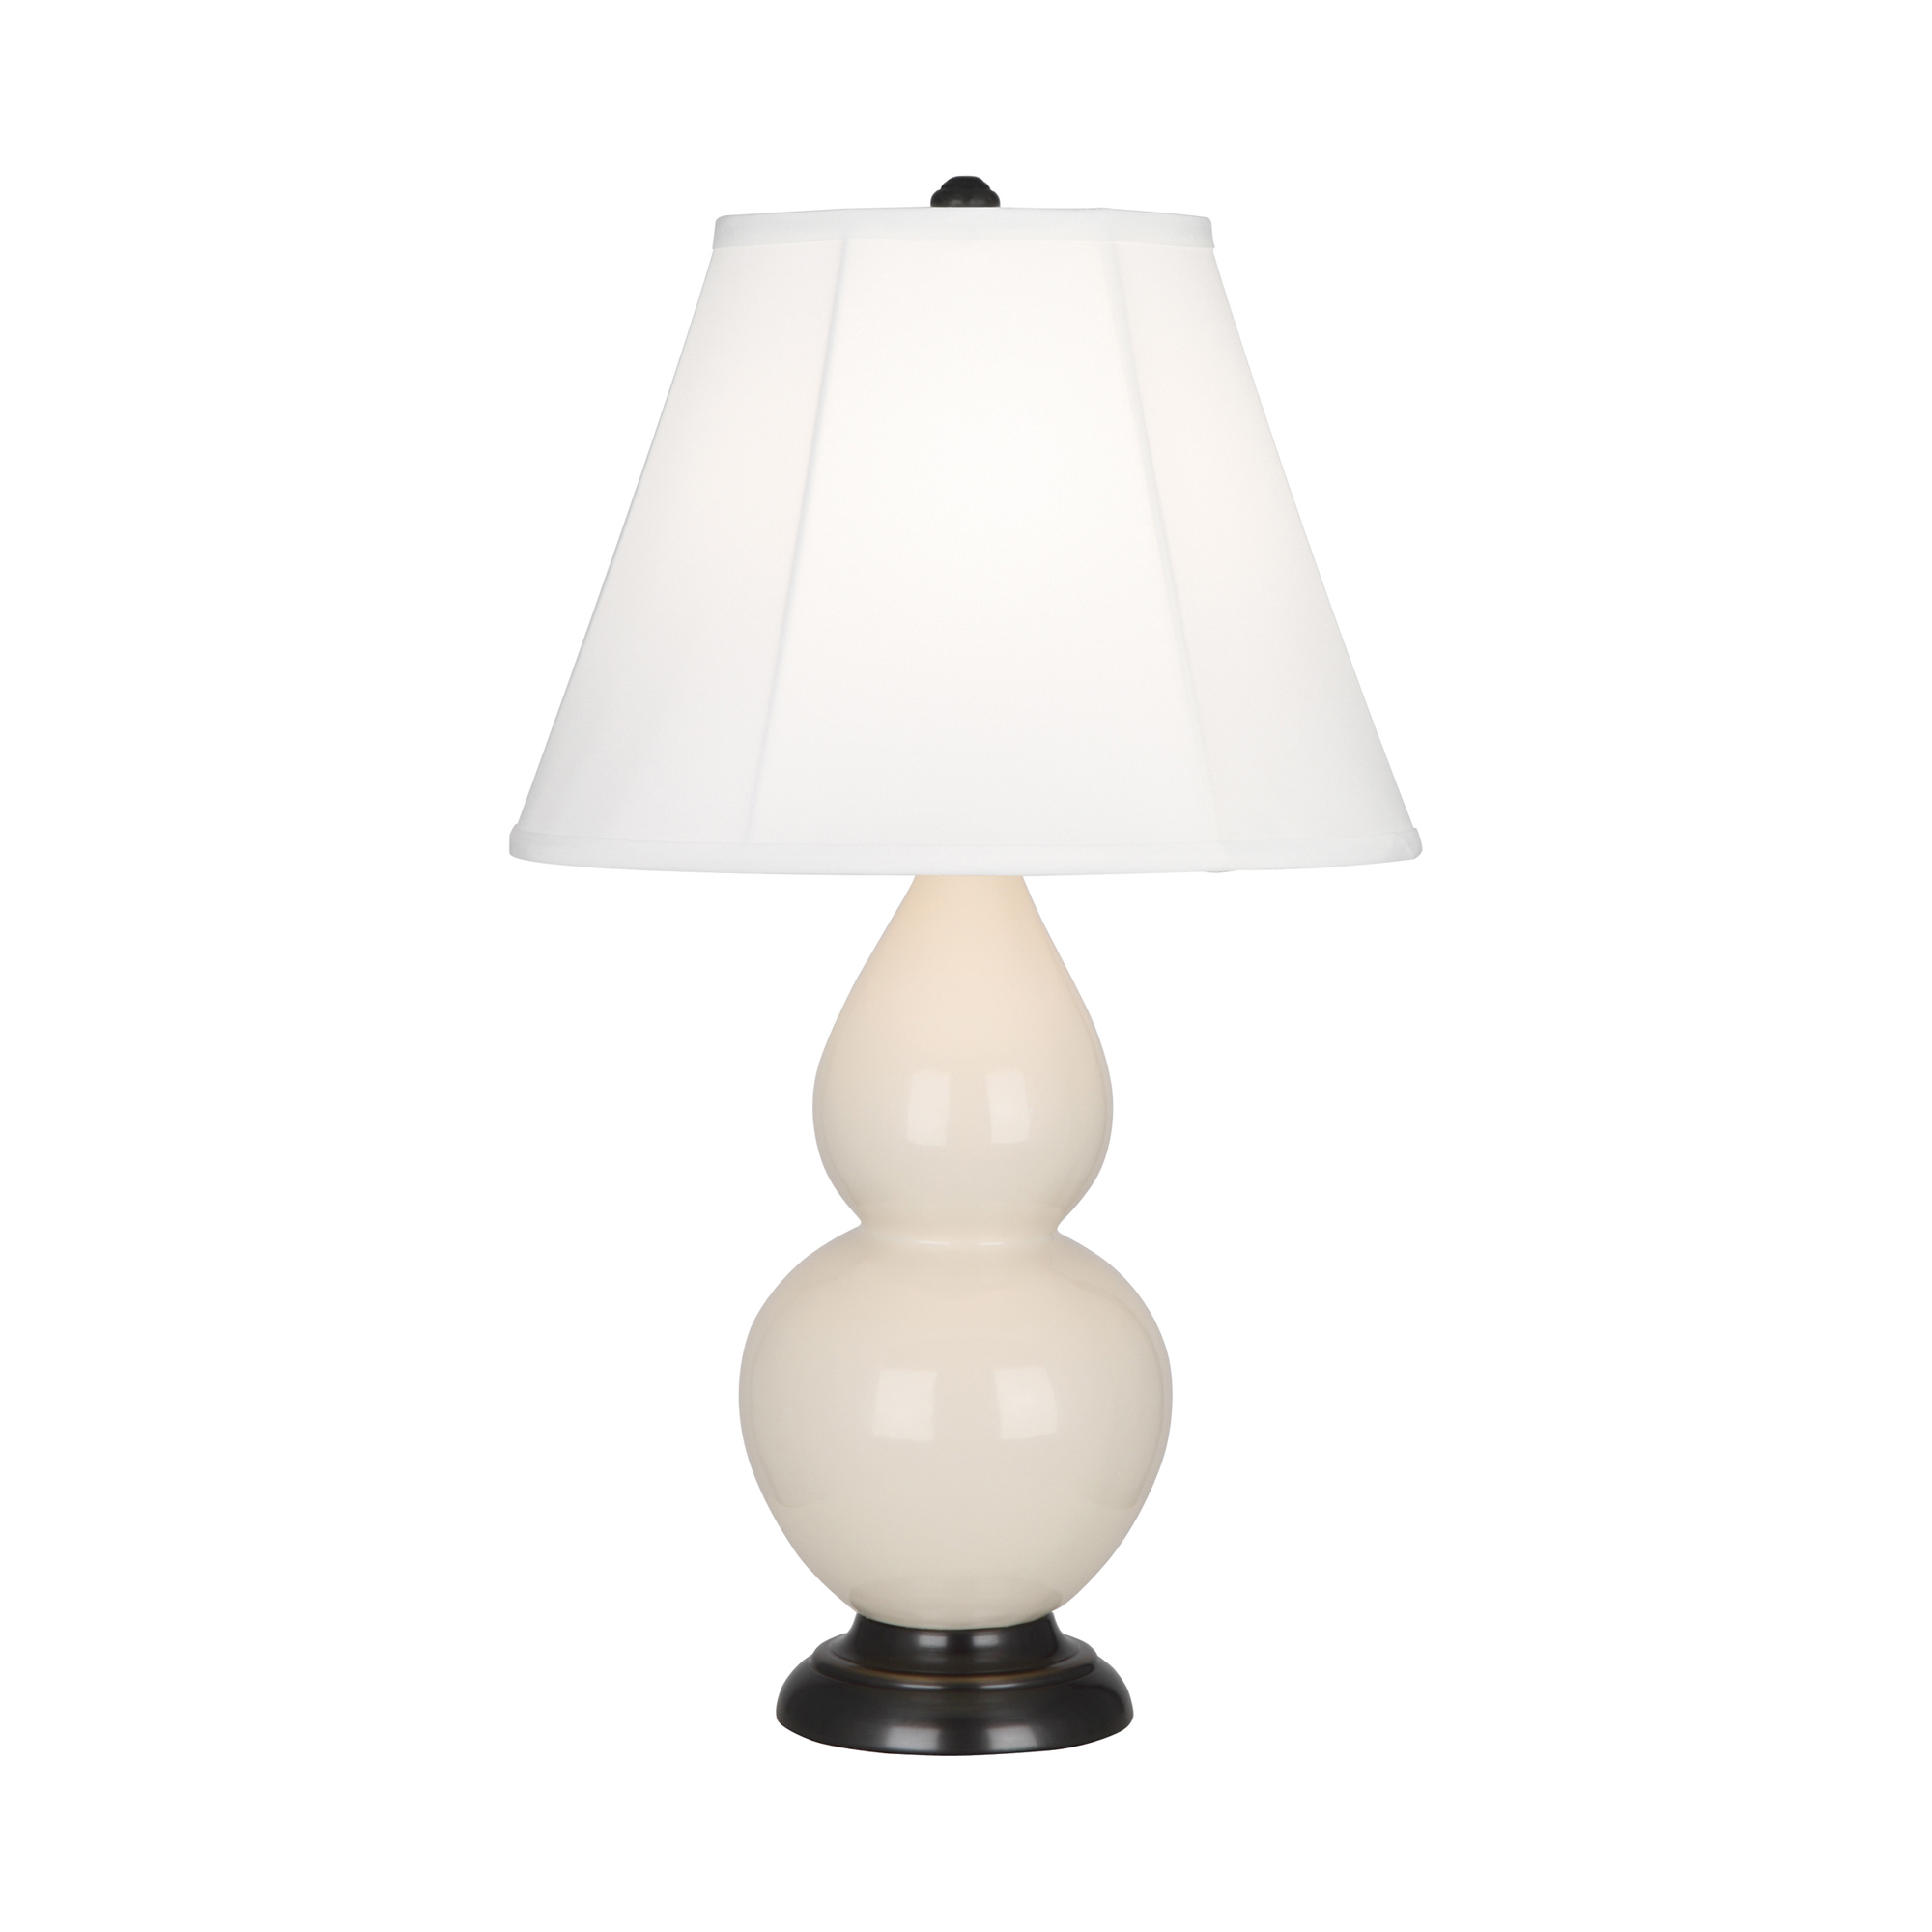 Small Double Gourd Accent Lamp Style #1775